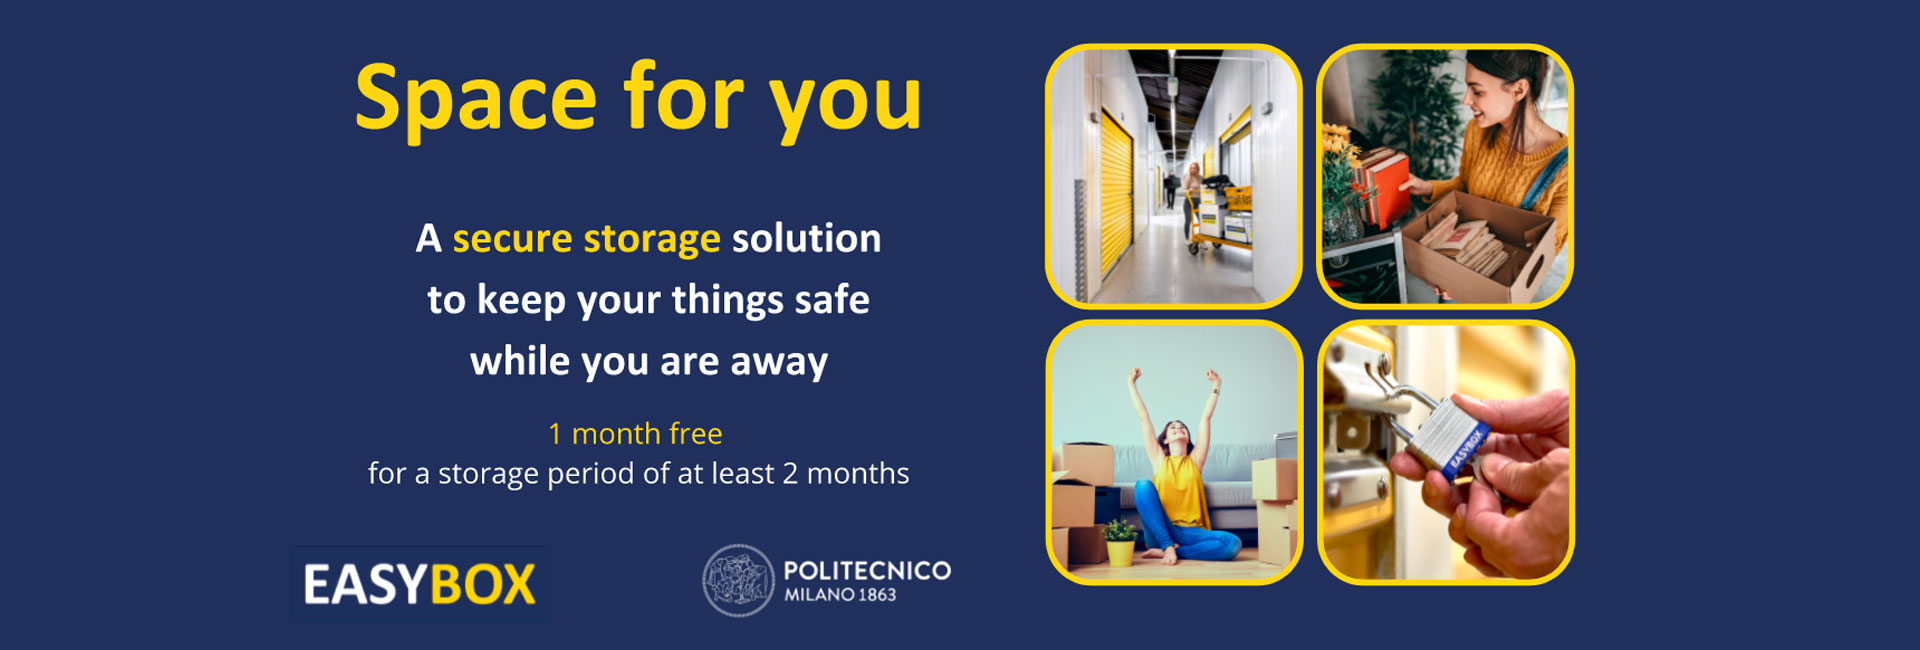 Space for you: A secure storage solution to keep your things safe while you're away